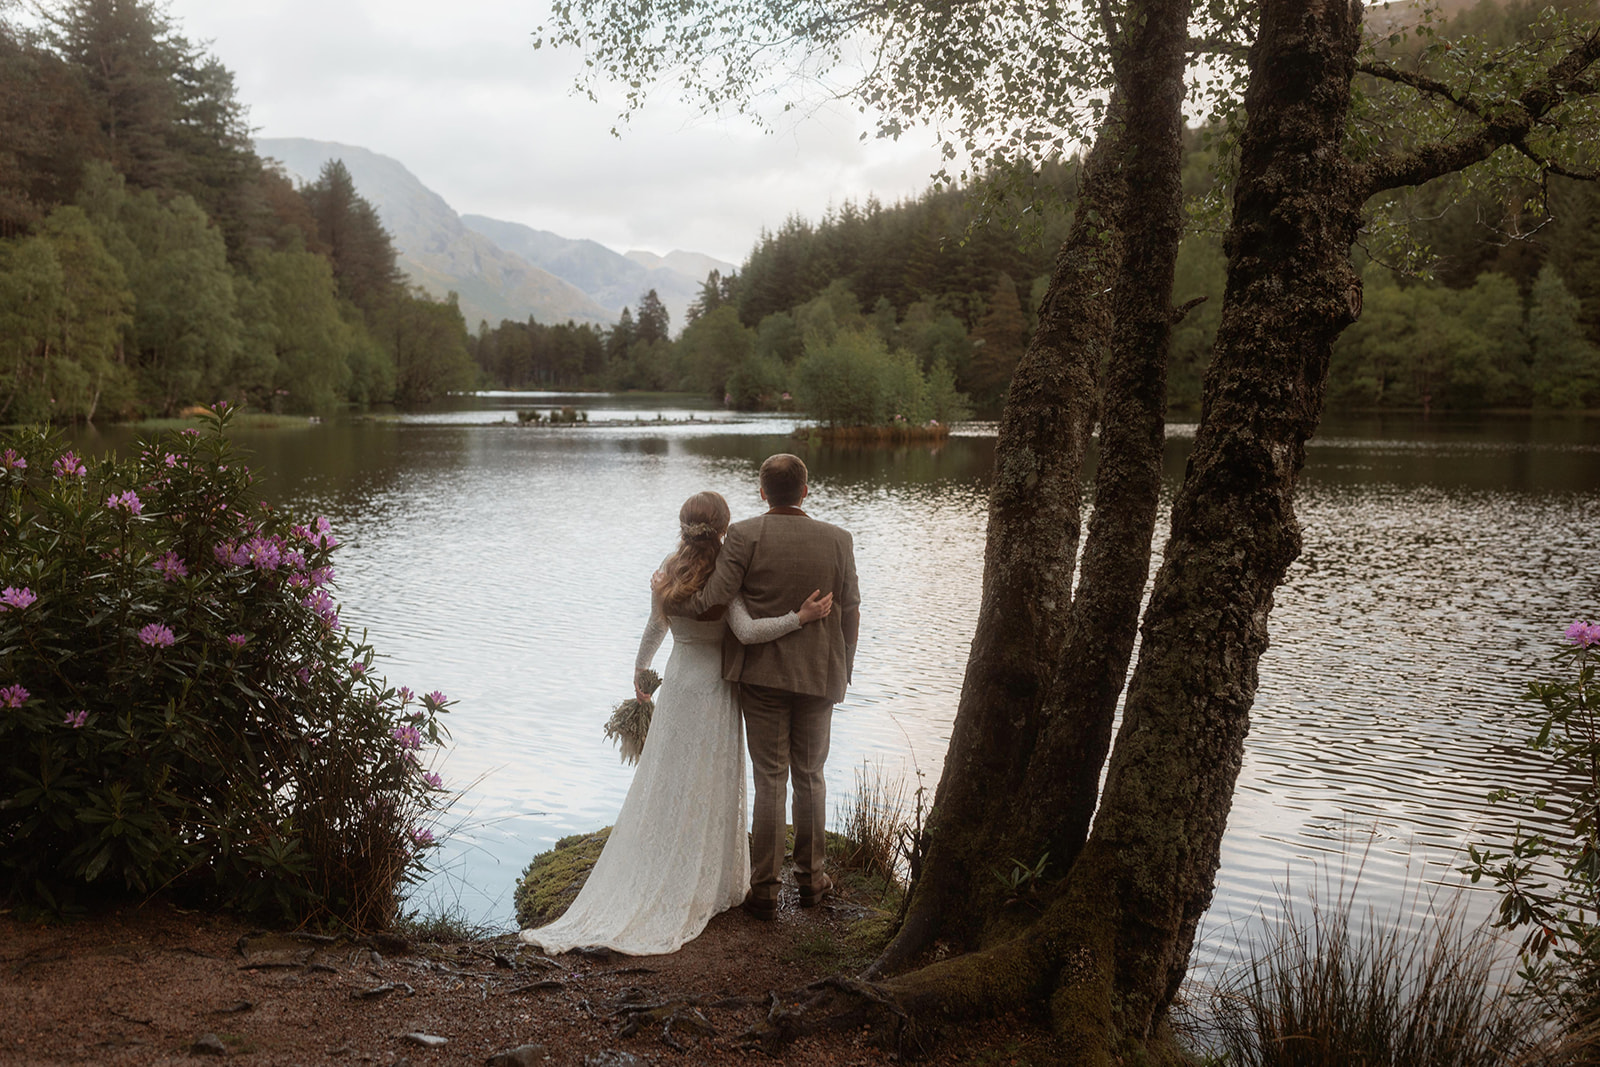 Holly and James enjoyed the views from the Jetty of Glencoe, Isle of Skye after their Elopement ceremony